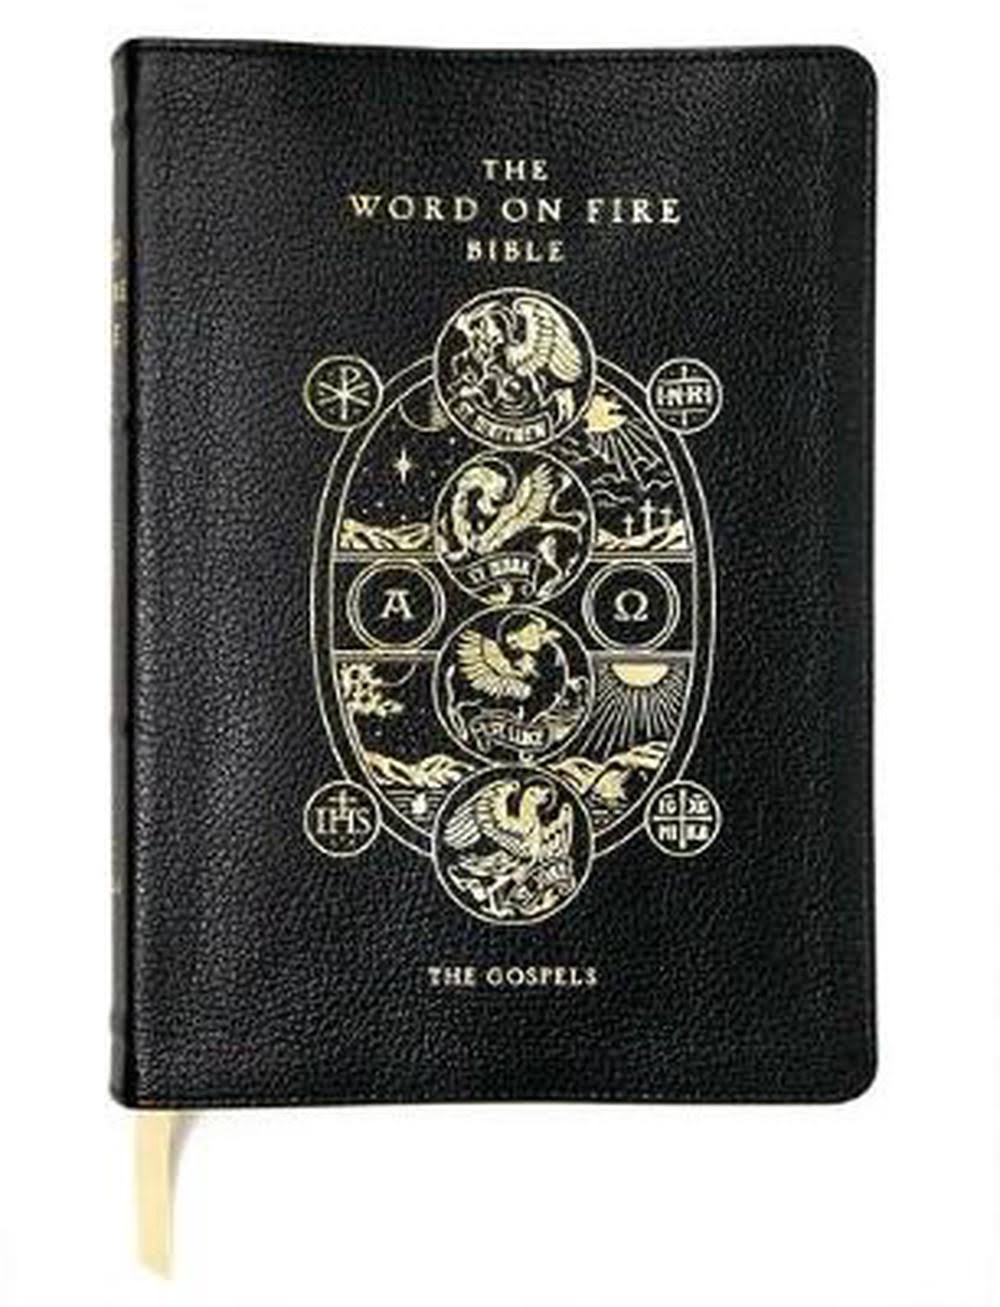 Word on Fire Bible: The Gospels Leather Bound [Book]